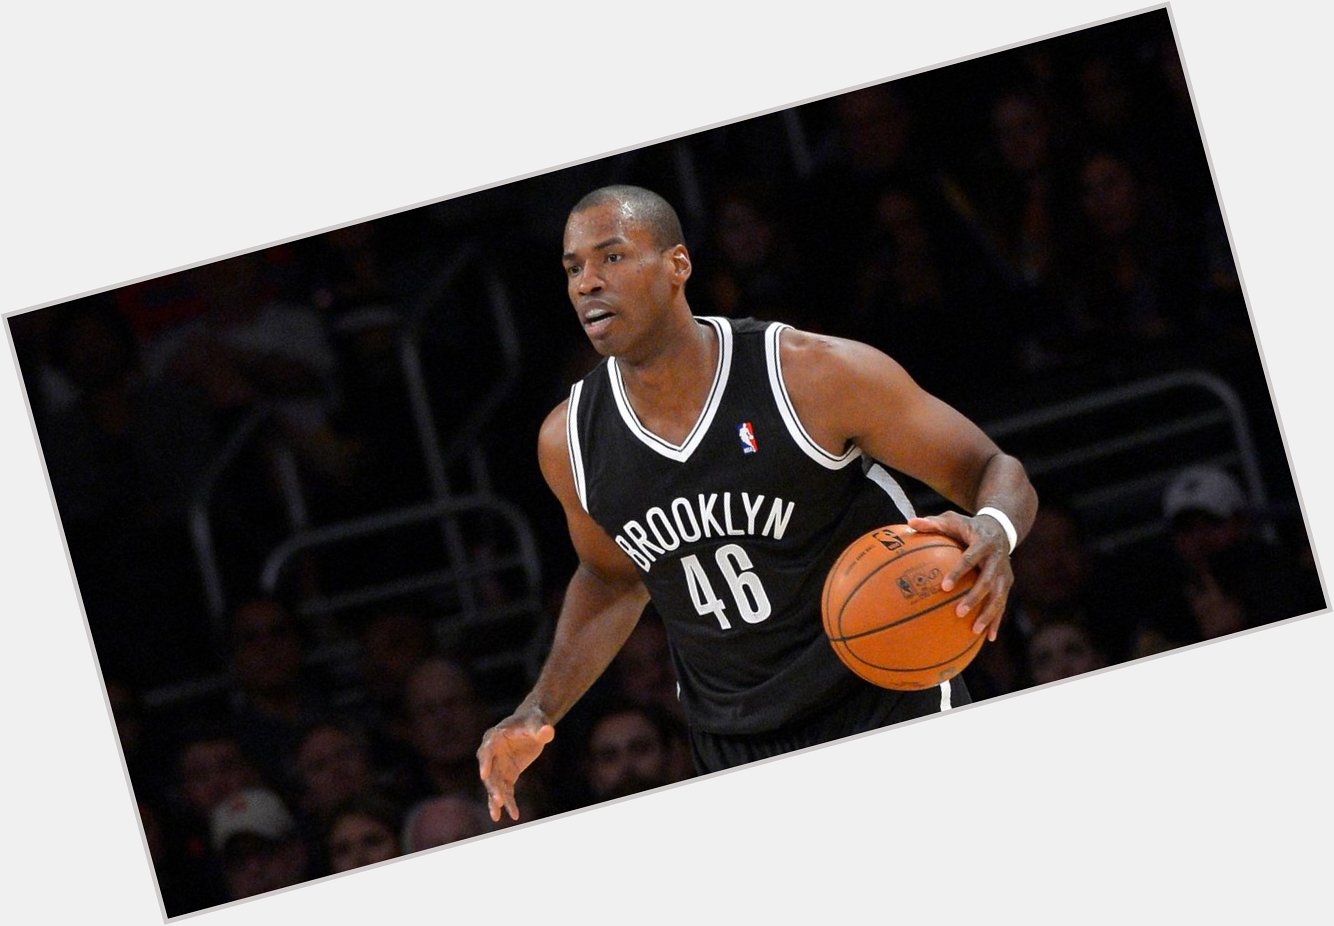 Happy Birthday to Jason Collins, who turns 36 today! 